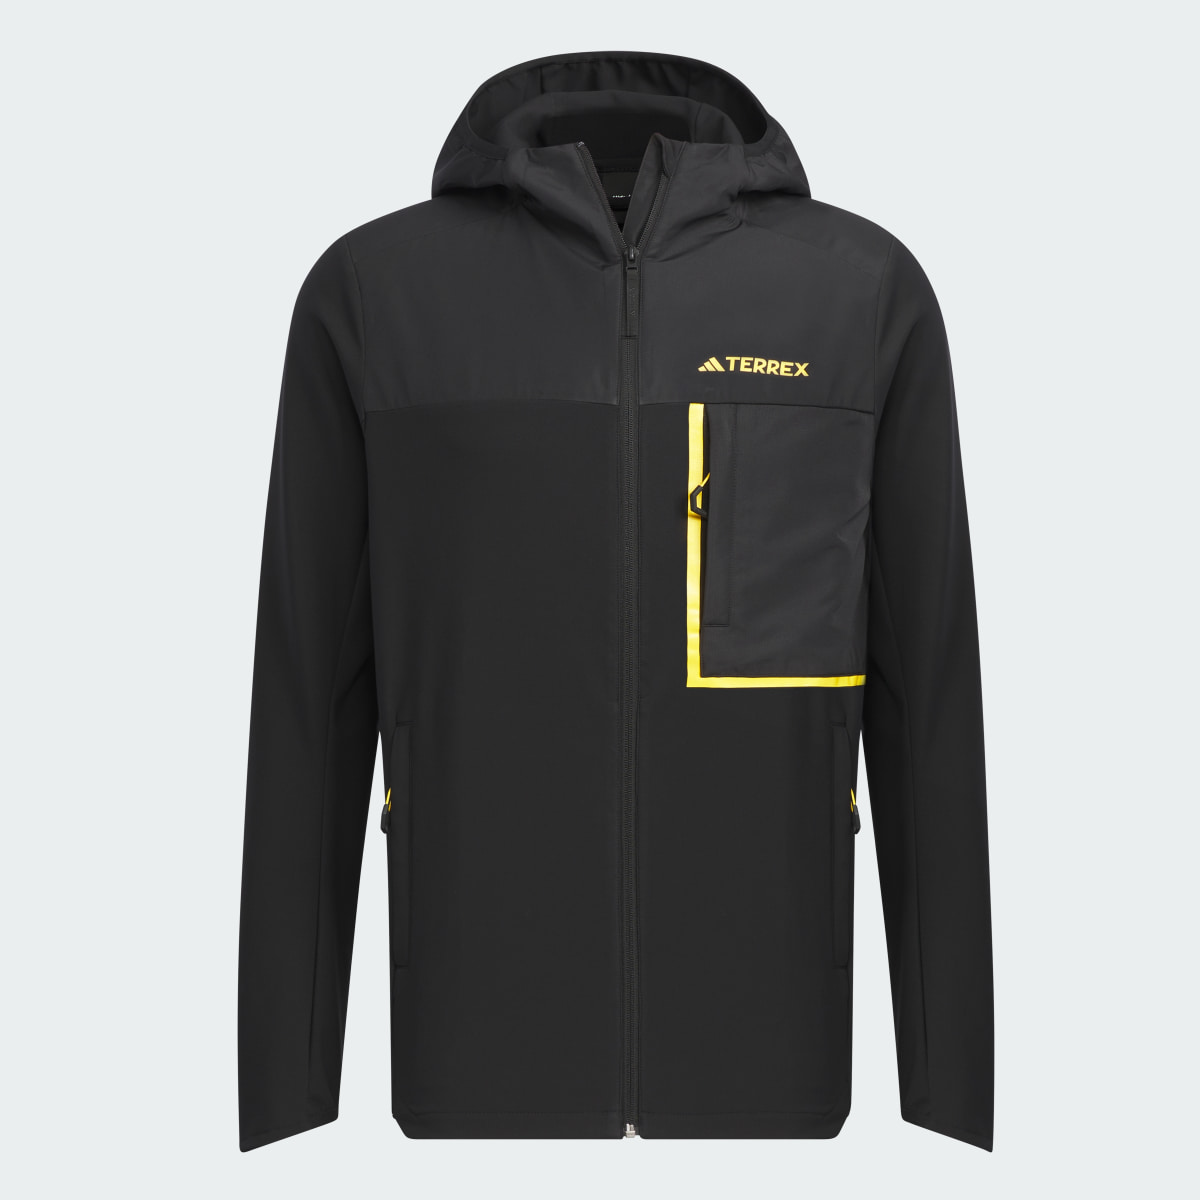 Adidas Veste soft shell National Geographic. 5